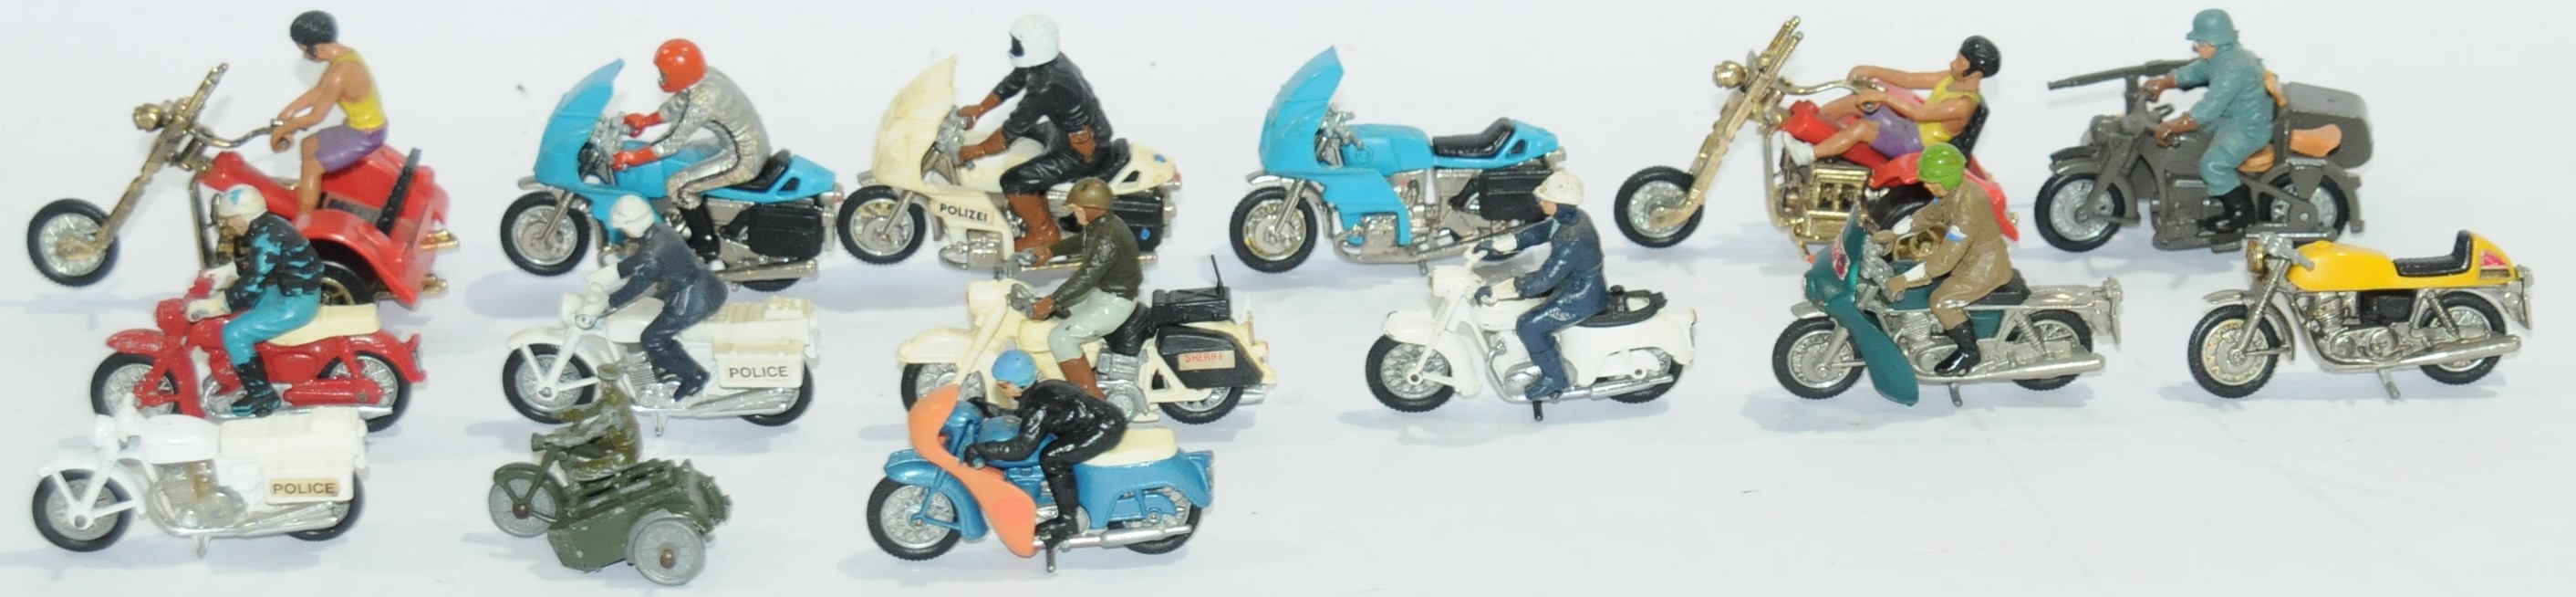 Britains & Similar an unboxed group of Bike related Models 